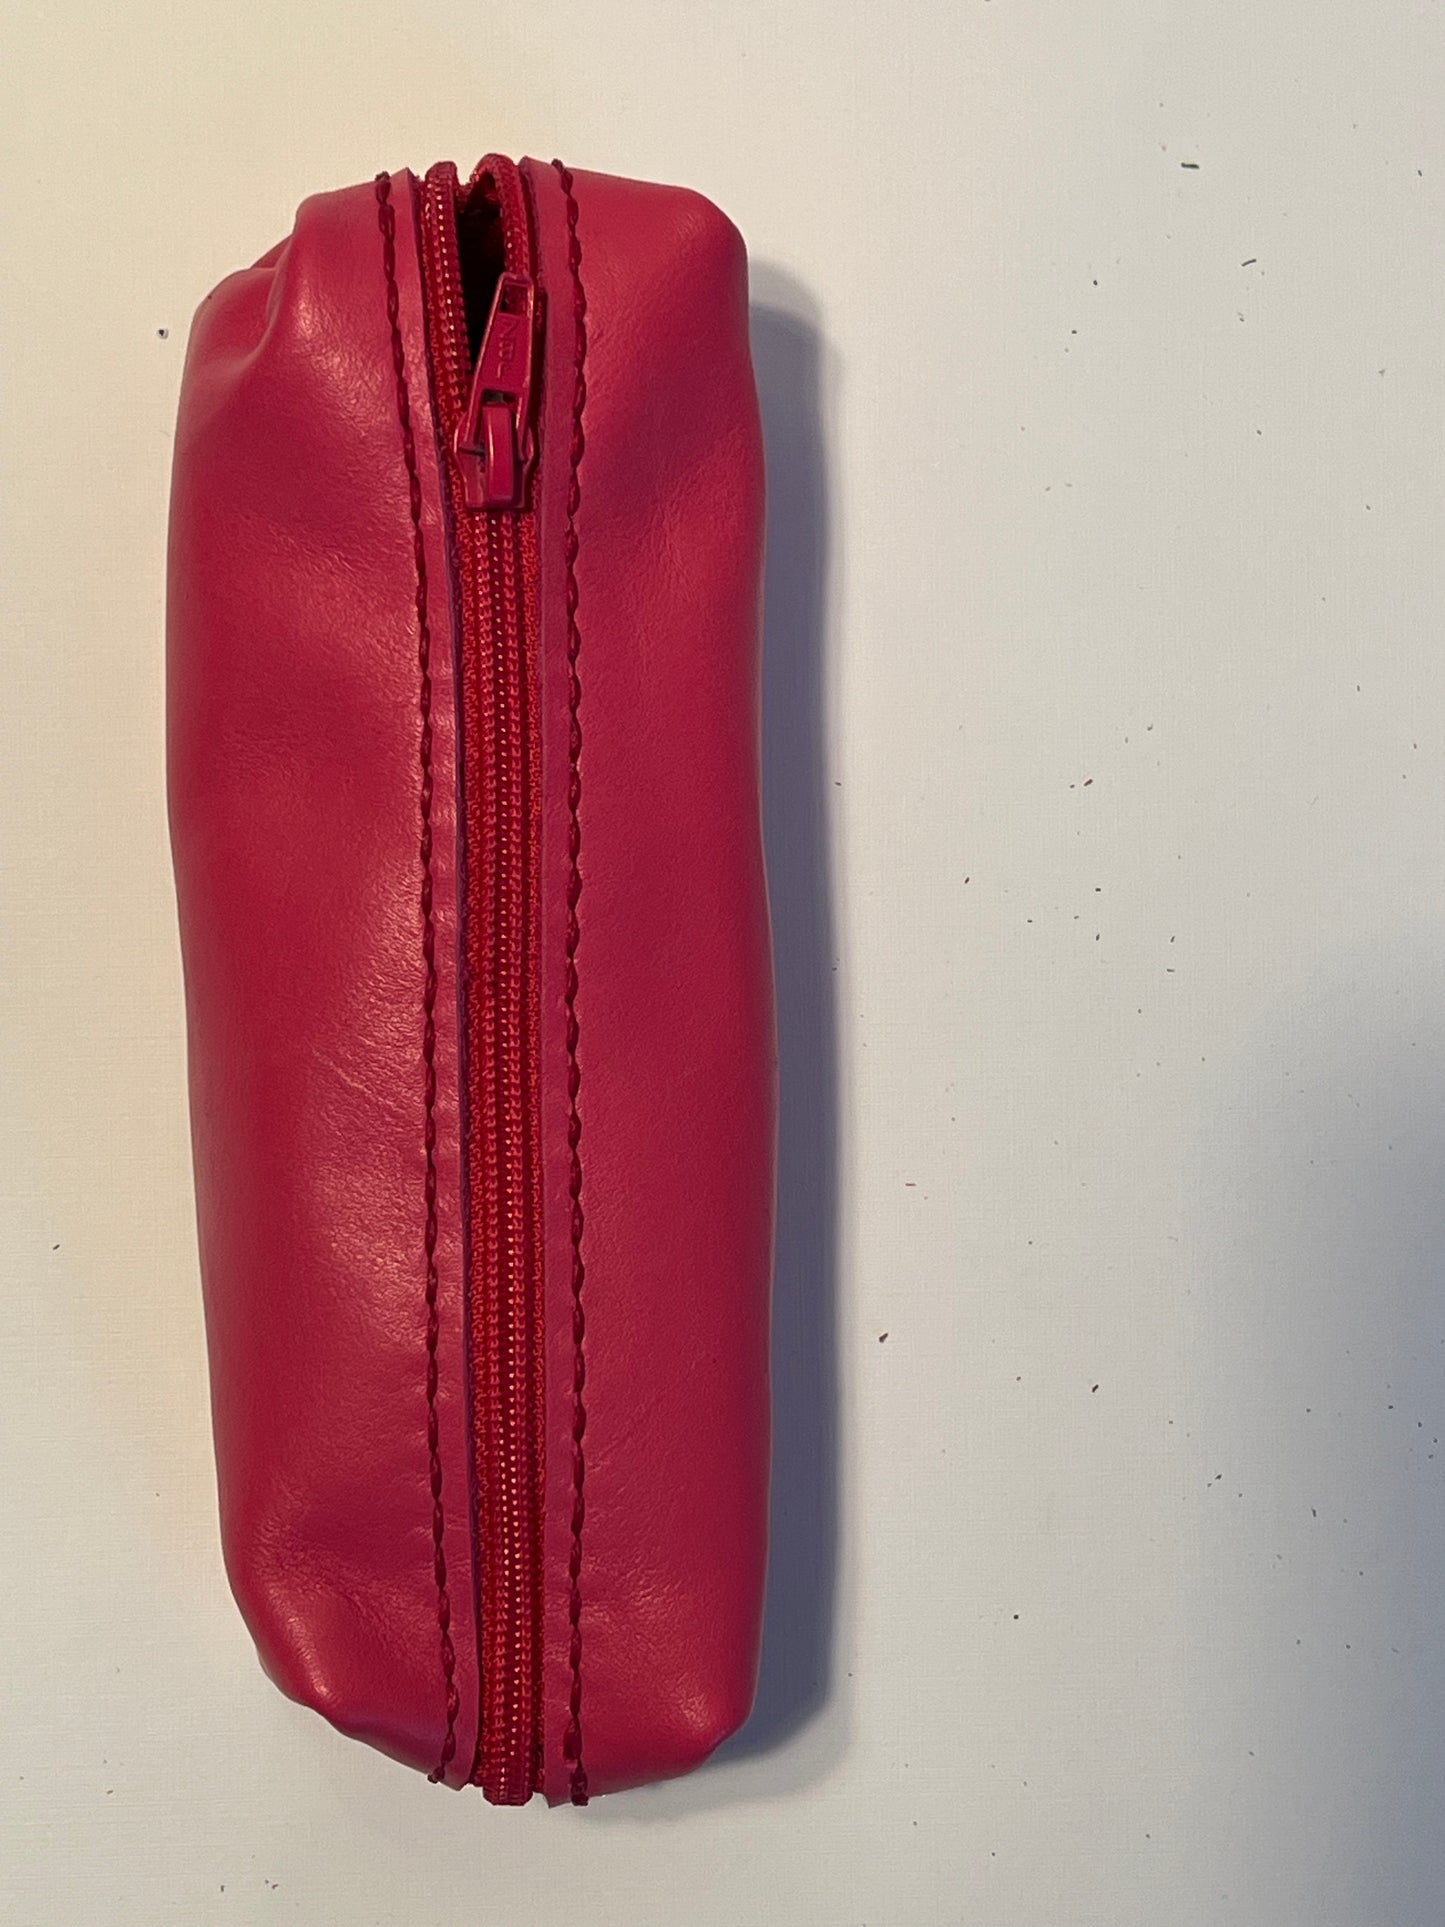 Leather Zip notion pouches - 100% leather - Hand Made